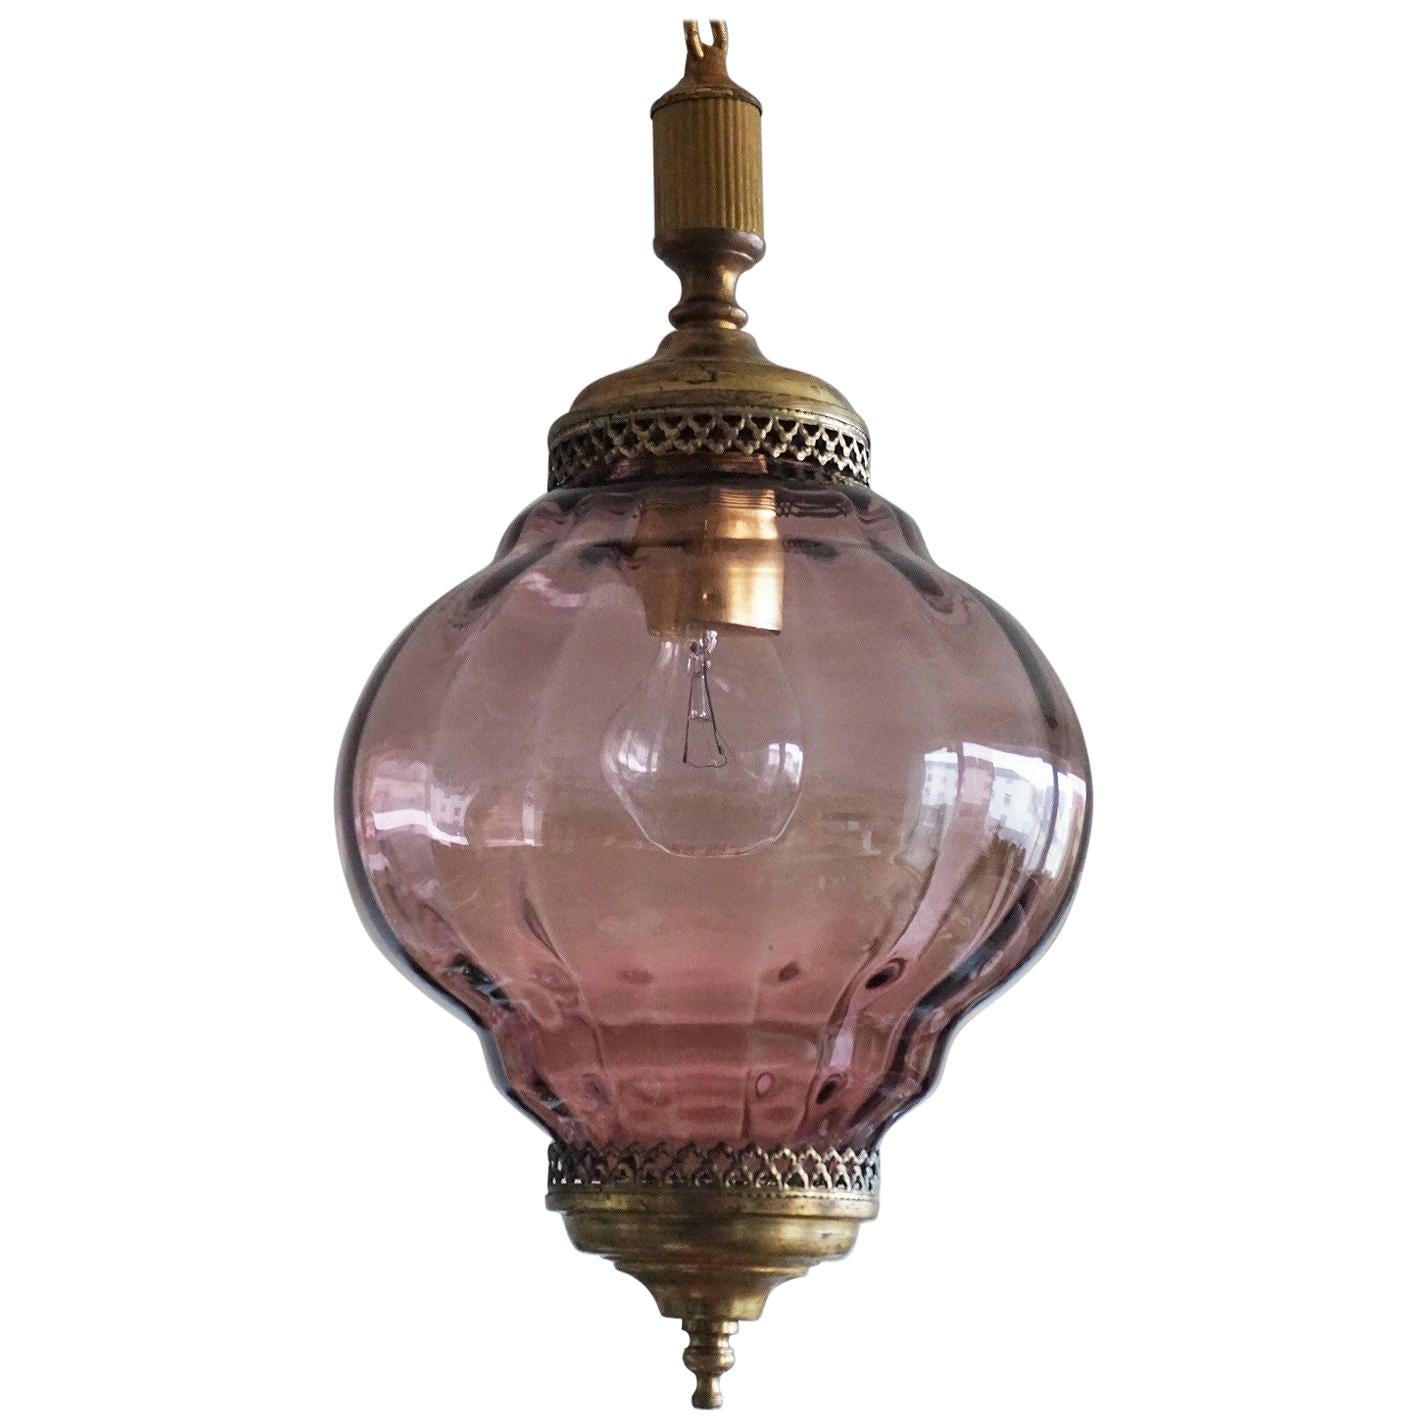 Murano amethyst colored glass pendant or lantern with brass mounts, Italy, 1950s.
It takes one E27 large light bulb.
European wiring: One E27 light bulb socket.
Measures:
Overall height 41